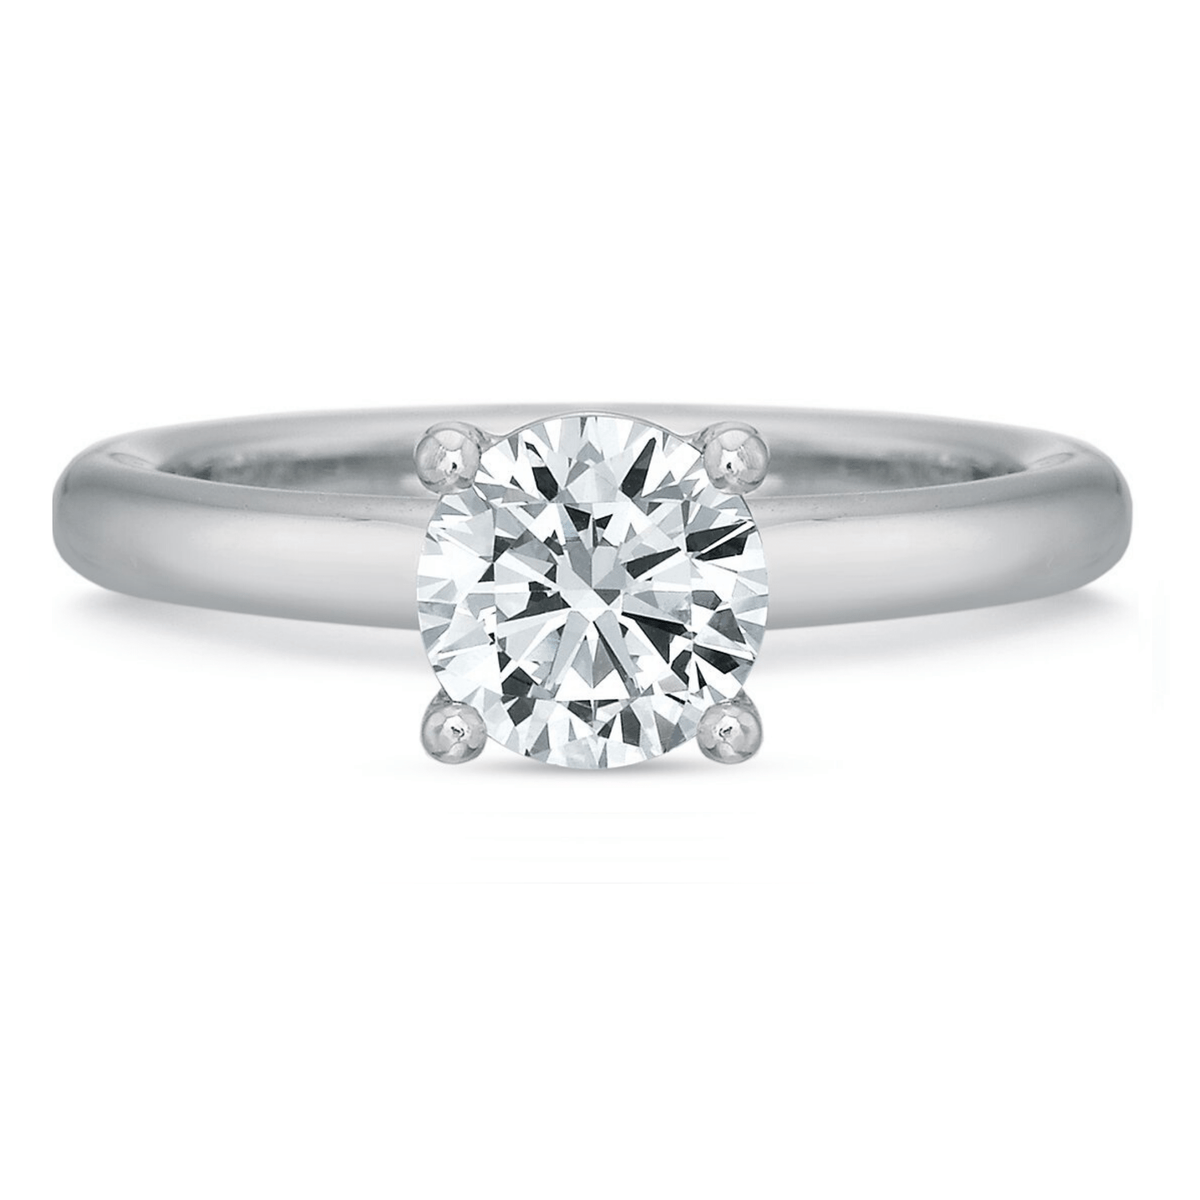 Platinum Mod Classic 4 Prong Solitaire Engagement Ring Setting